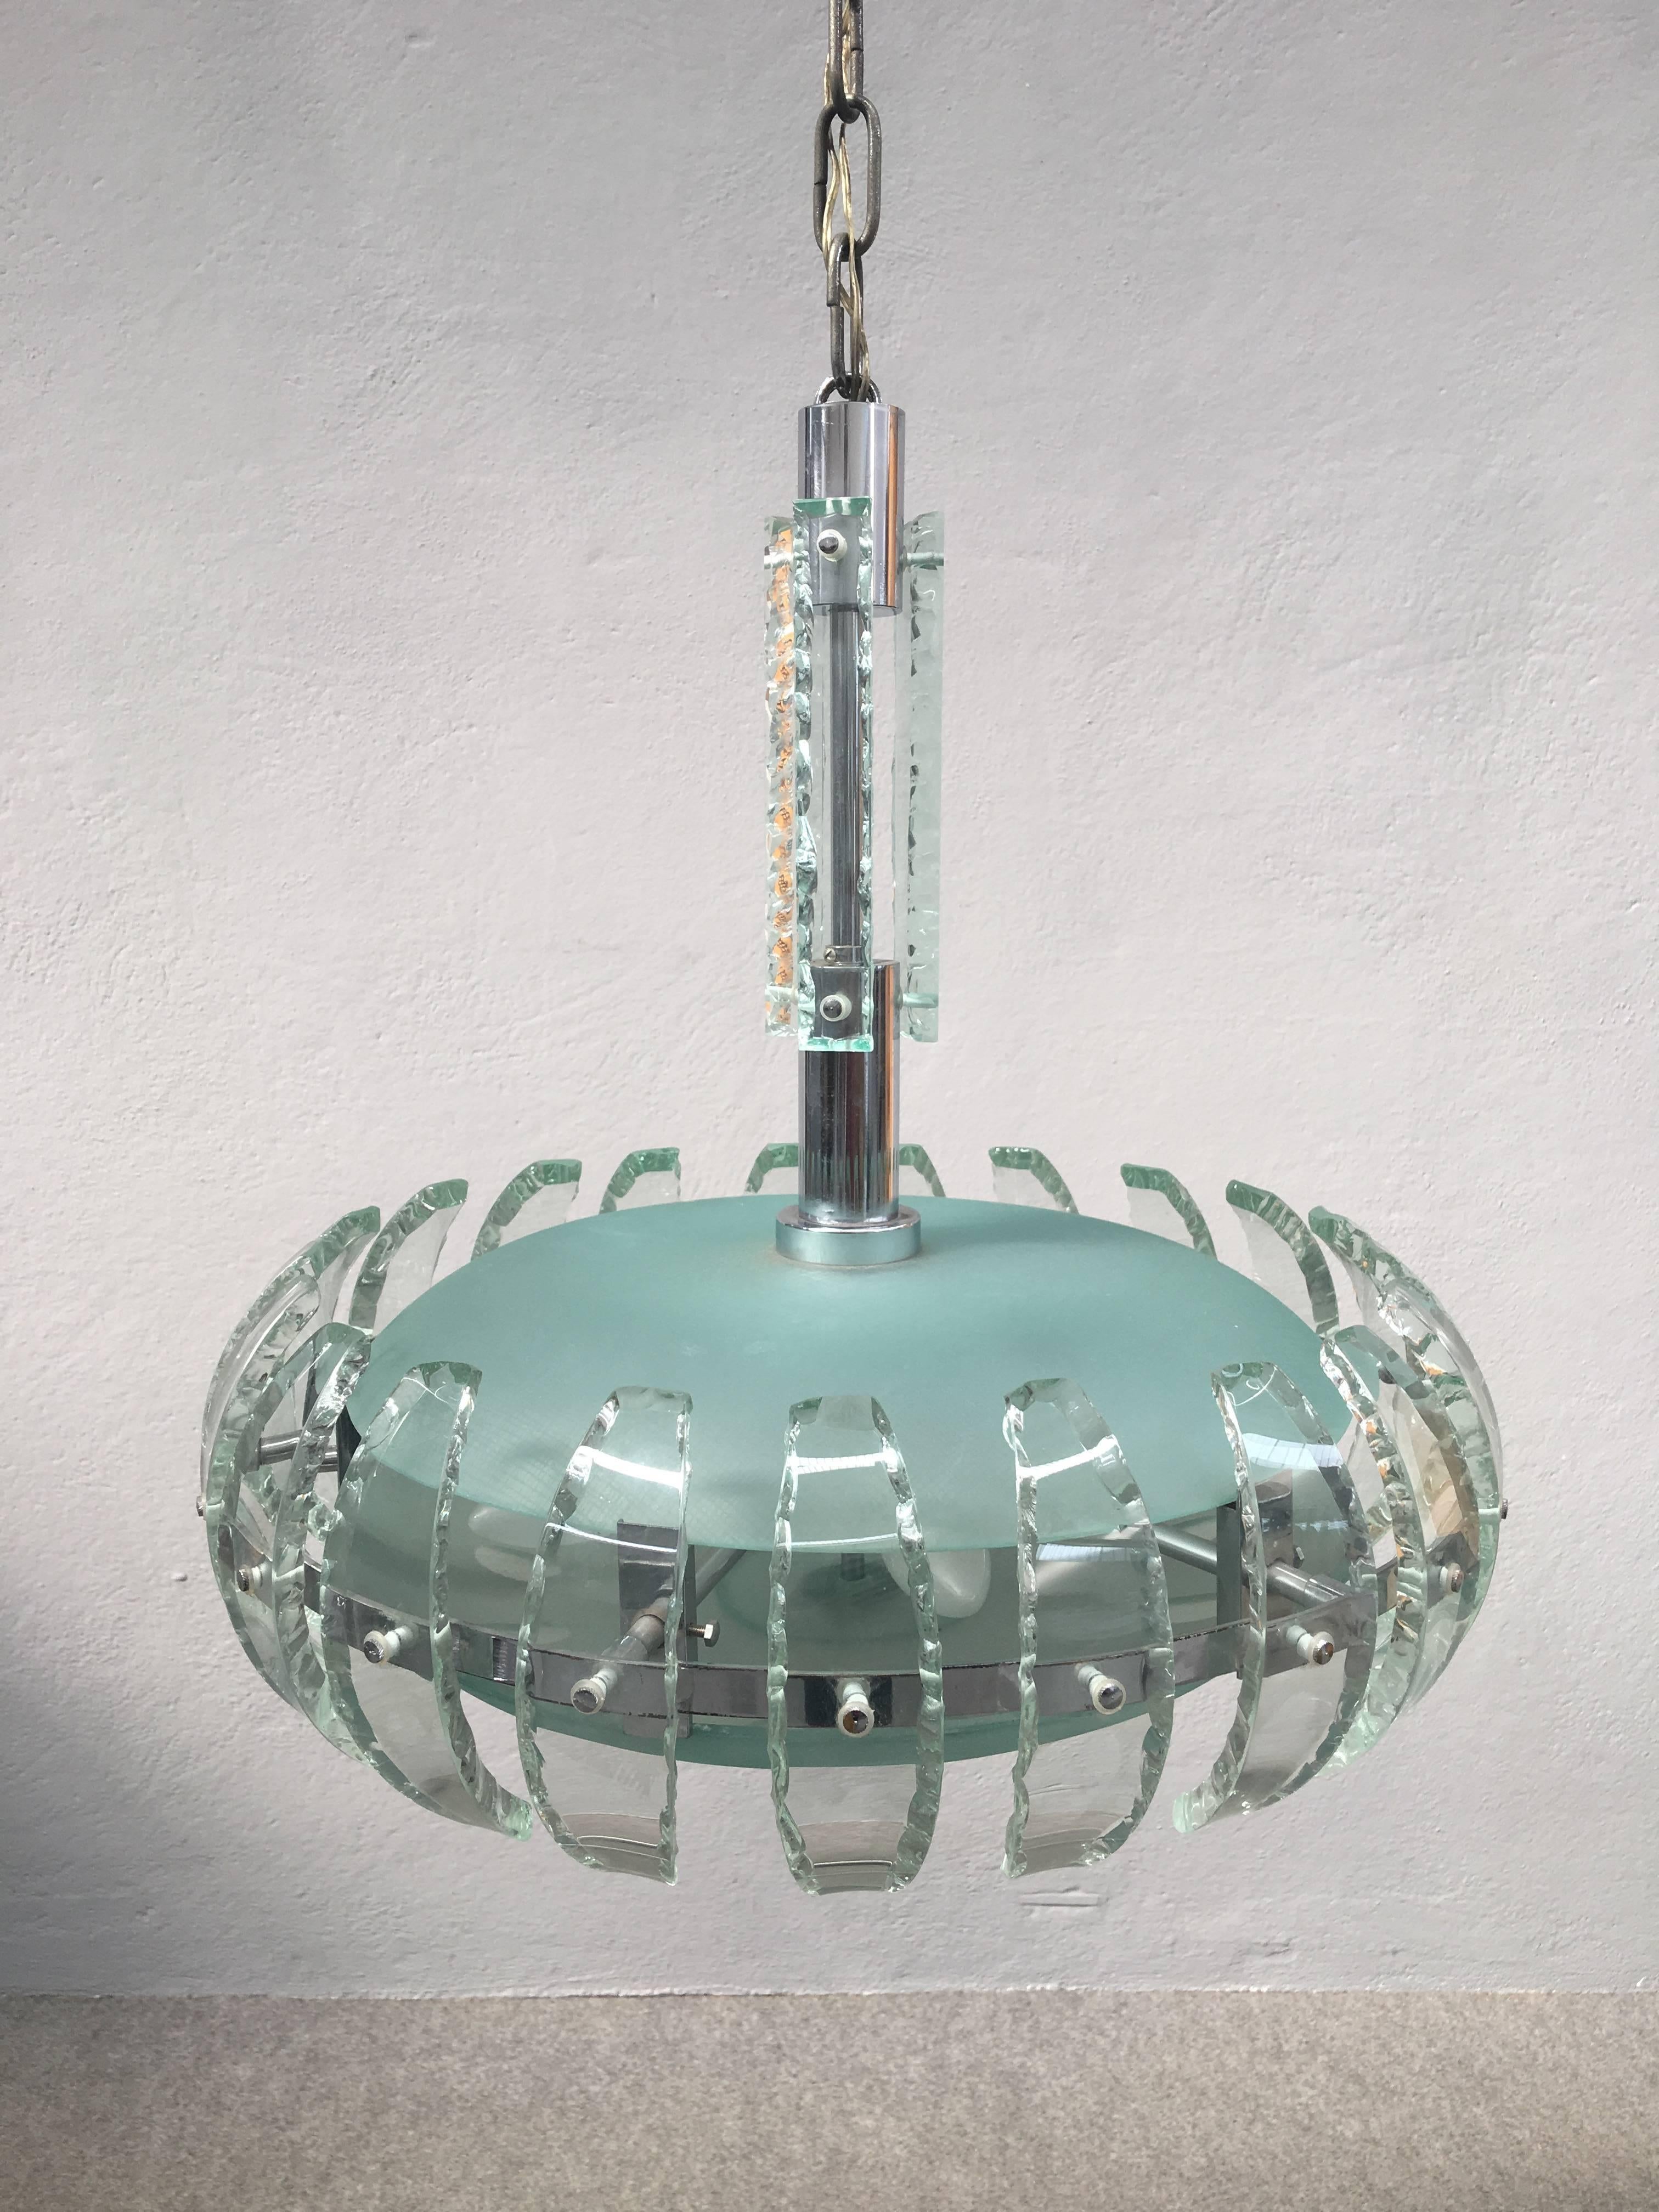 Wonderful chandelier attributed to Fontana Arte. Chrome and glass with pretty frosted glass petals surrounded the glass sphere.